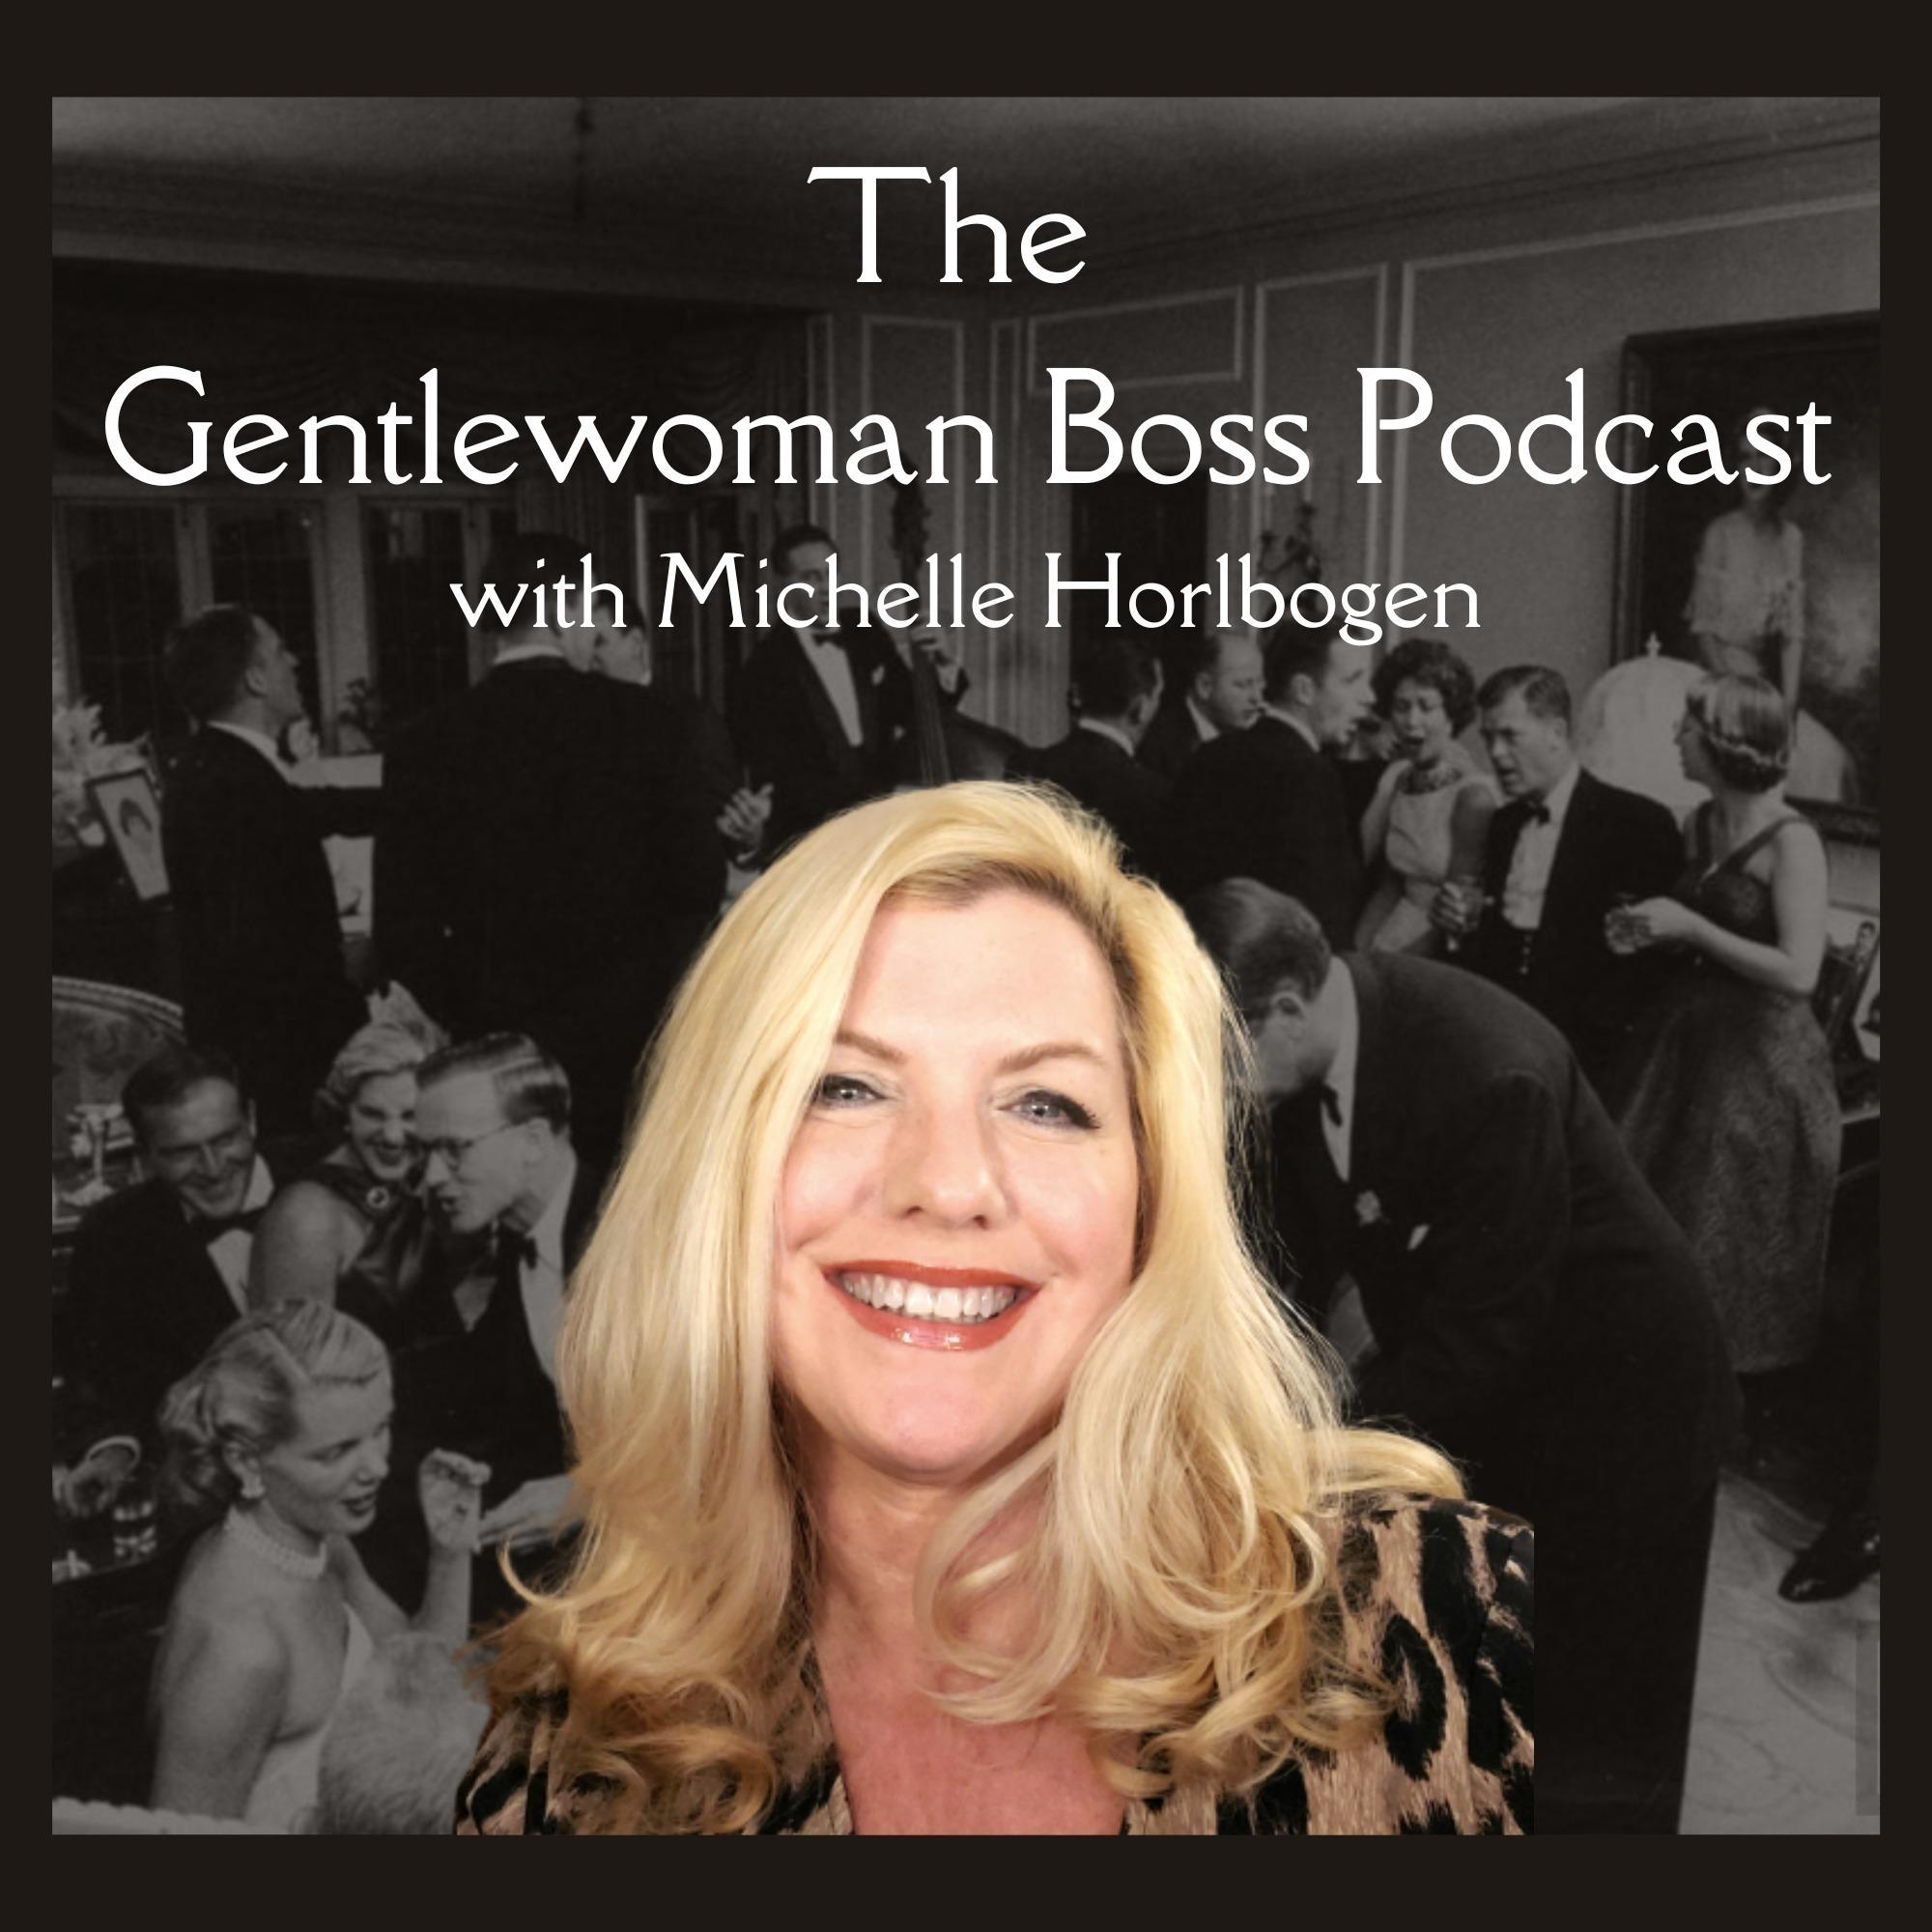 The Gentlewoman Boss Podcast